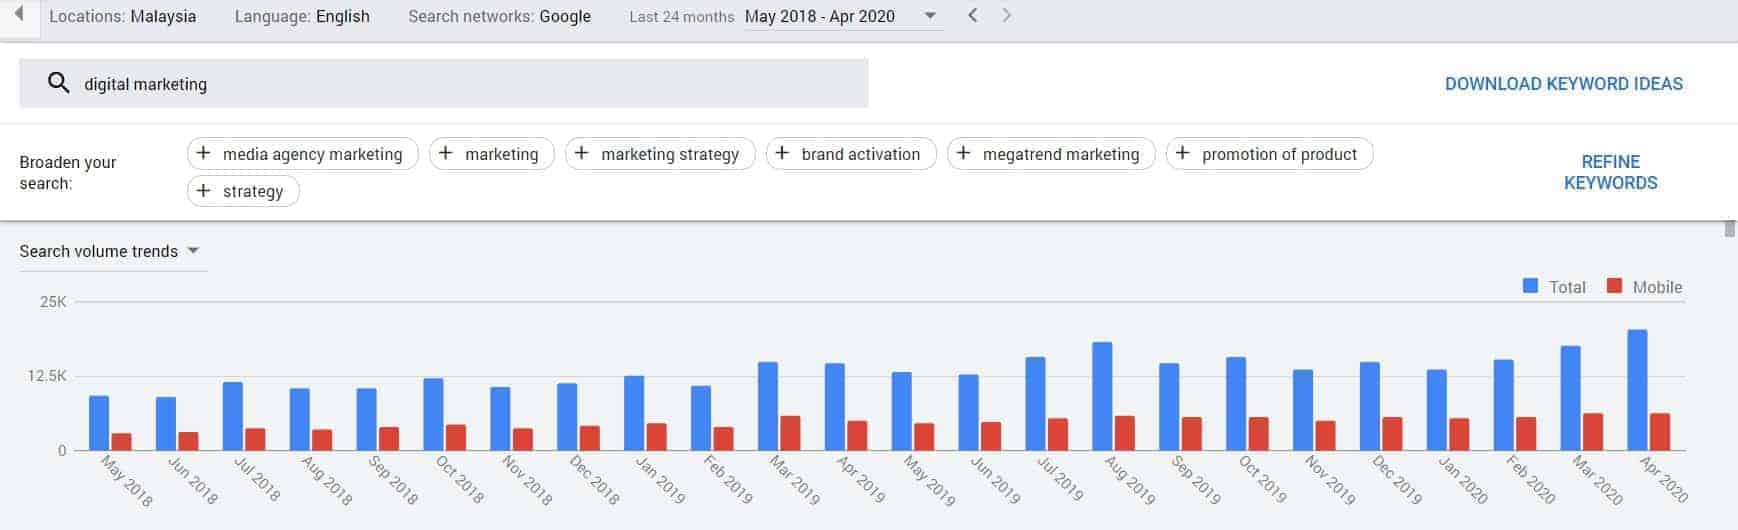 digital marketing businesses searches during COVID 19